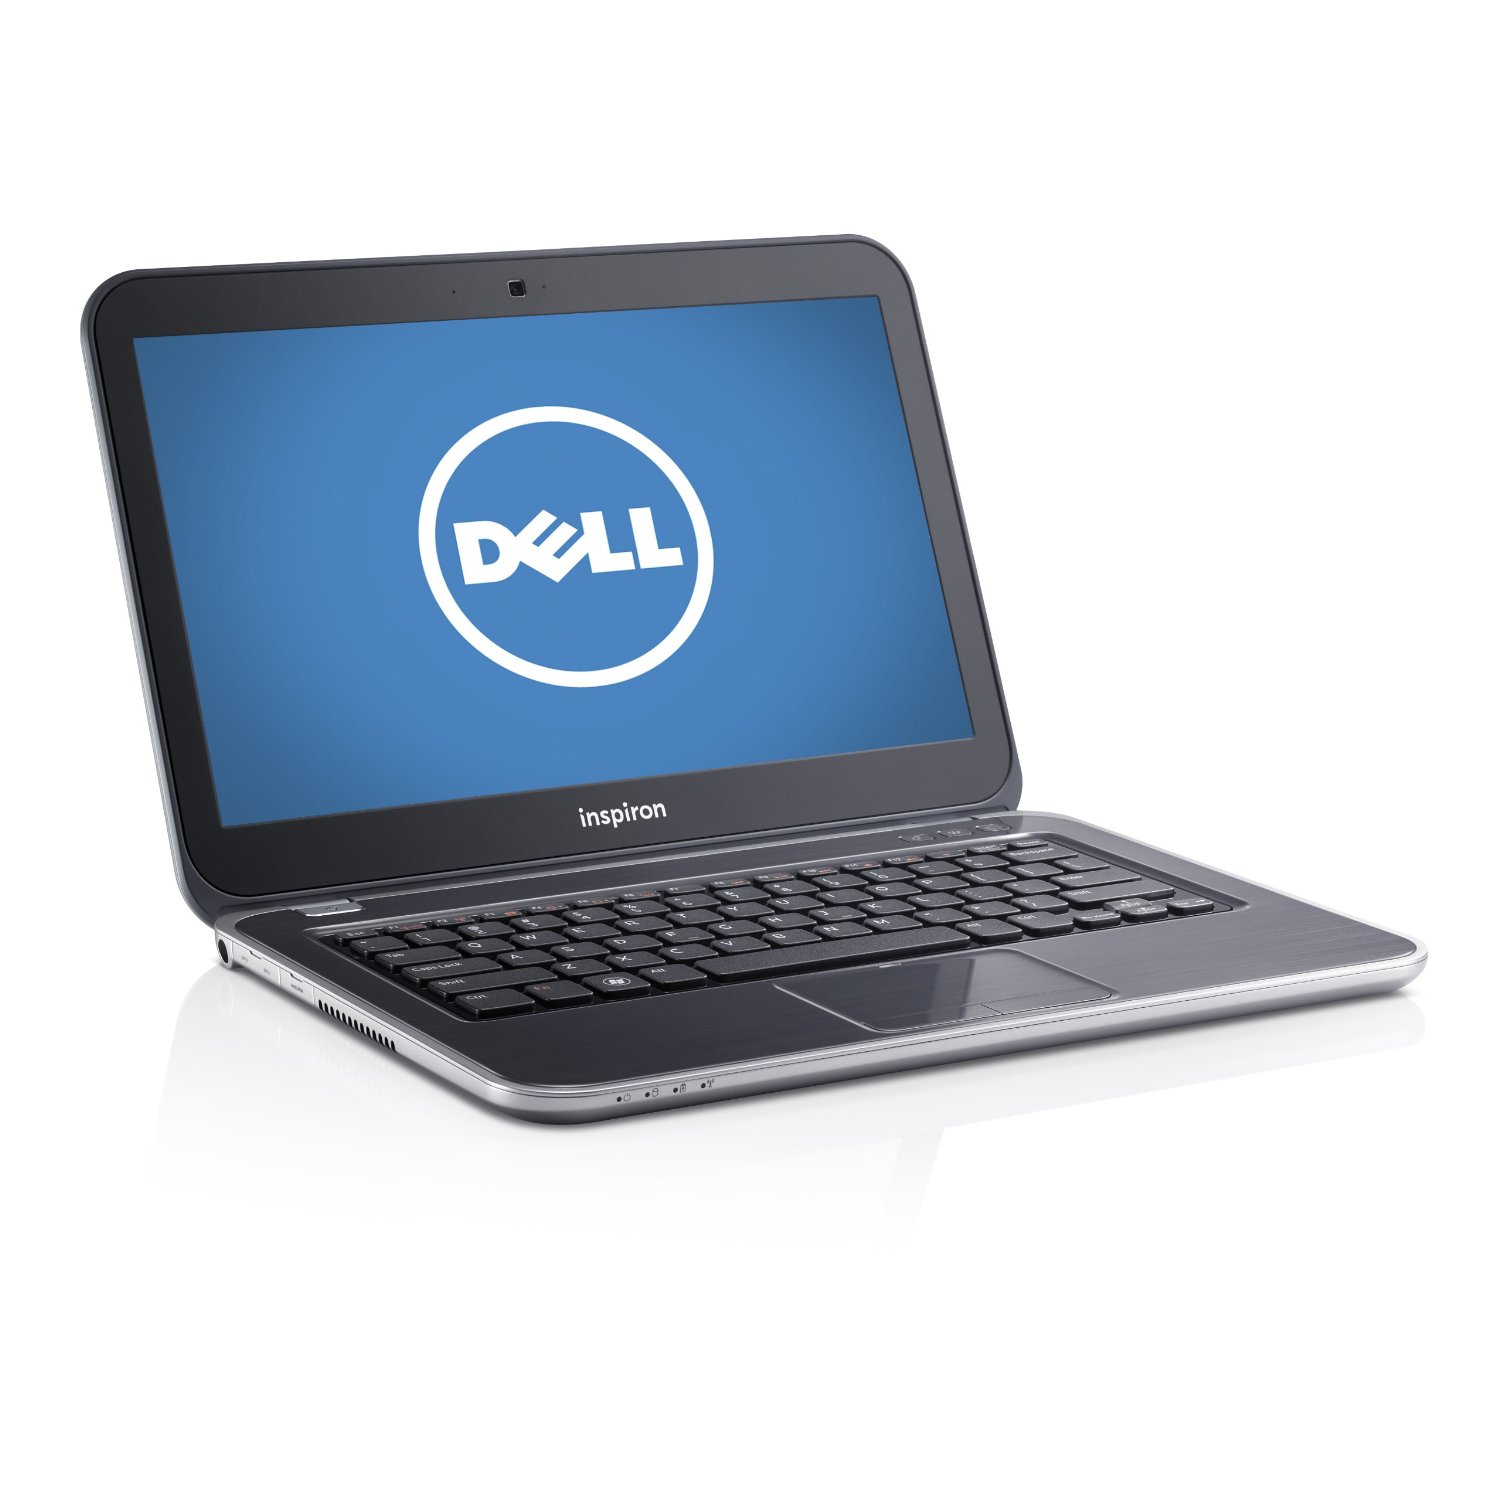 http://thetechjournal.com/wp-content/uploads/images/1210/1349897573-dell-inspiron-13z-13inch-laptop-6.jpg